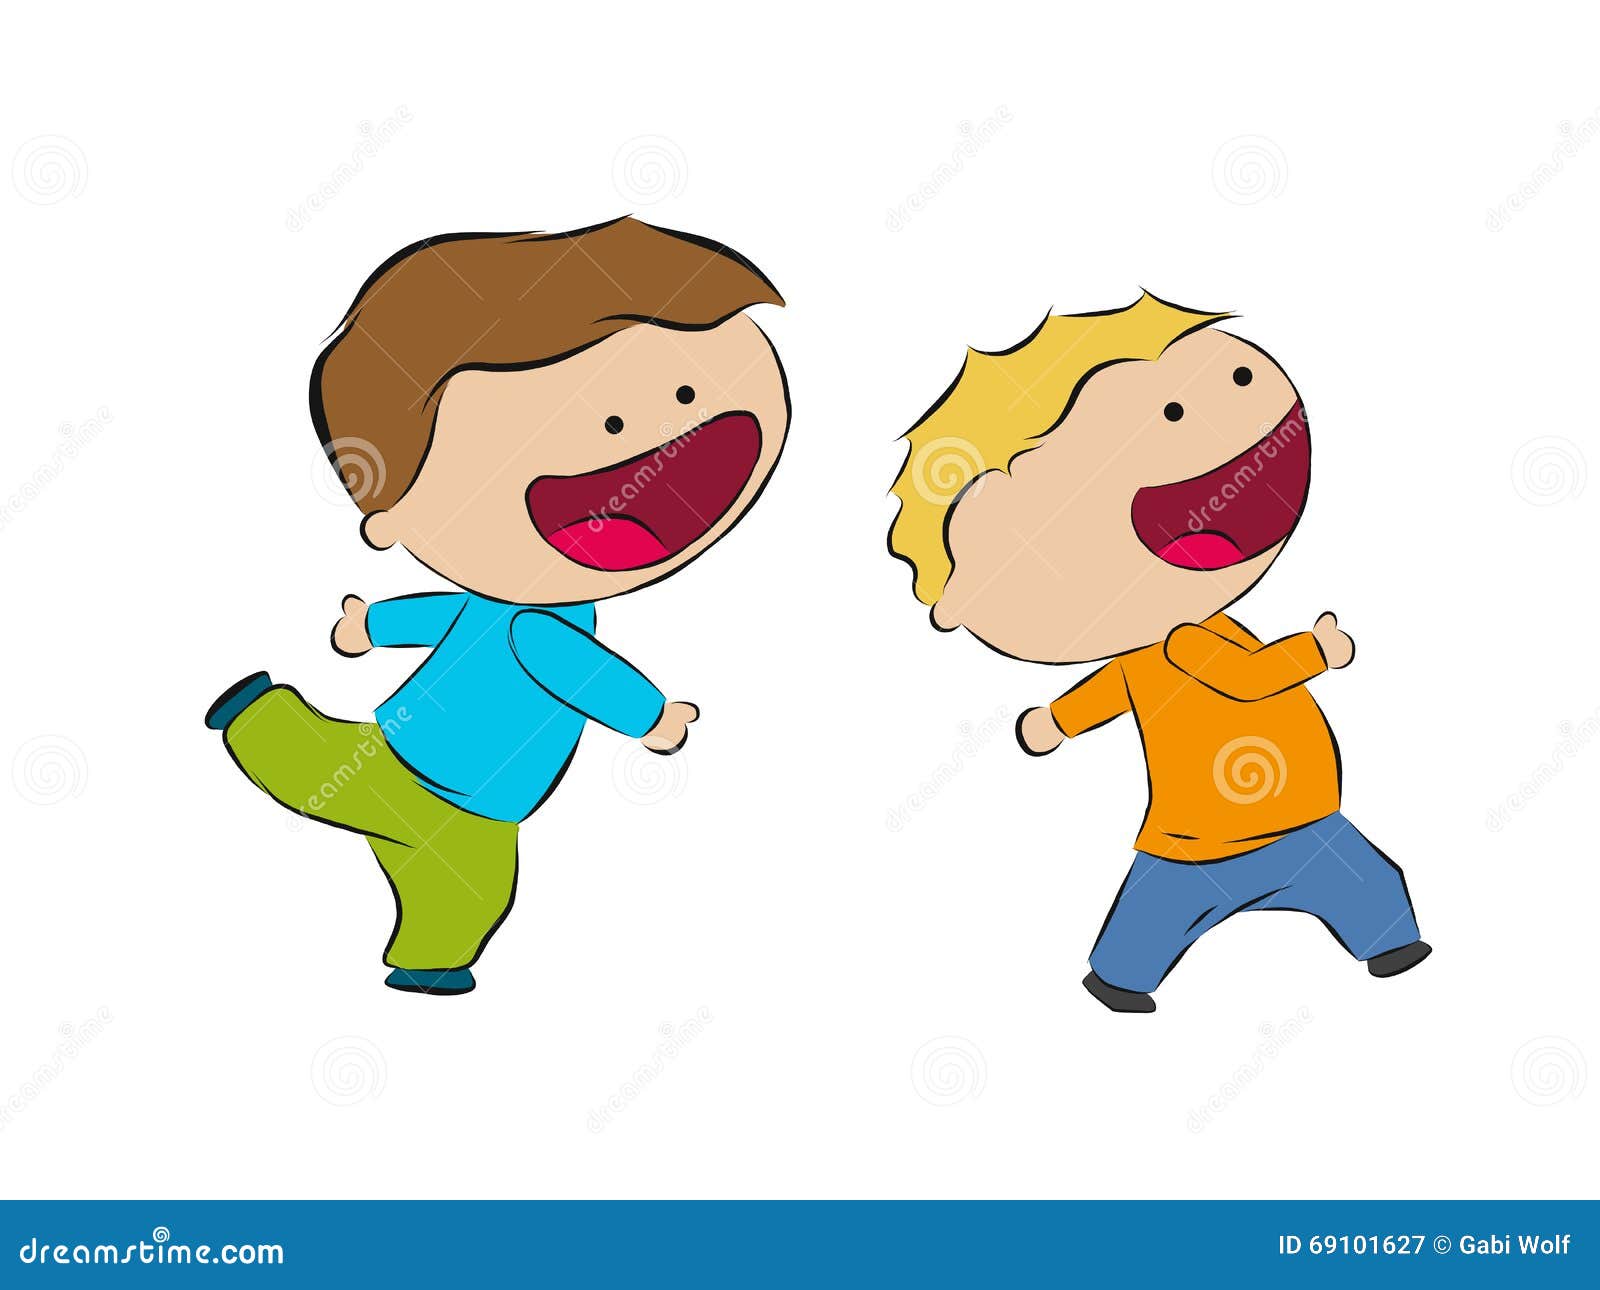 Two running boys stock vector. Illustration of people - 69101627